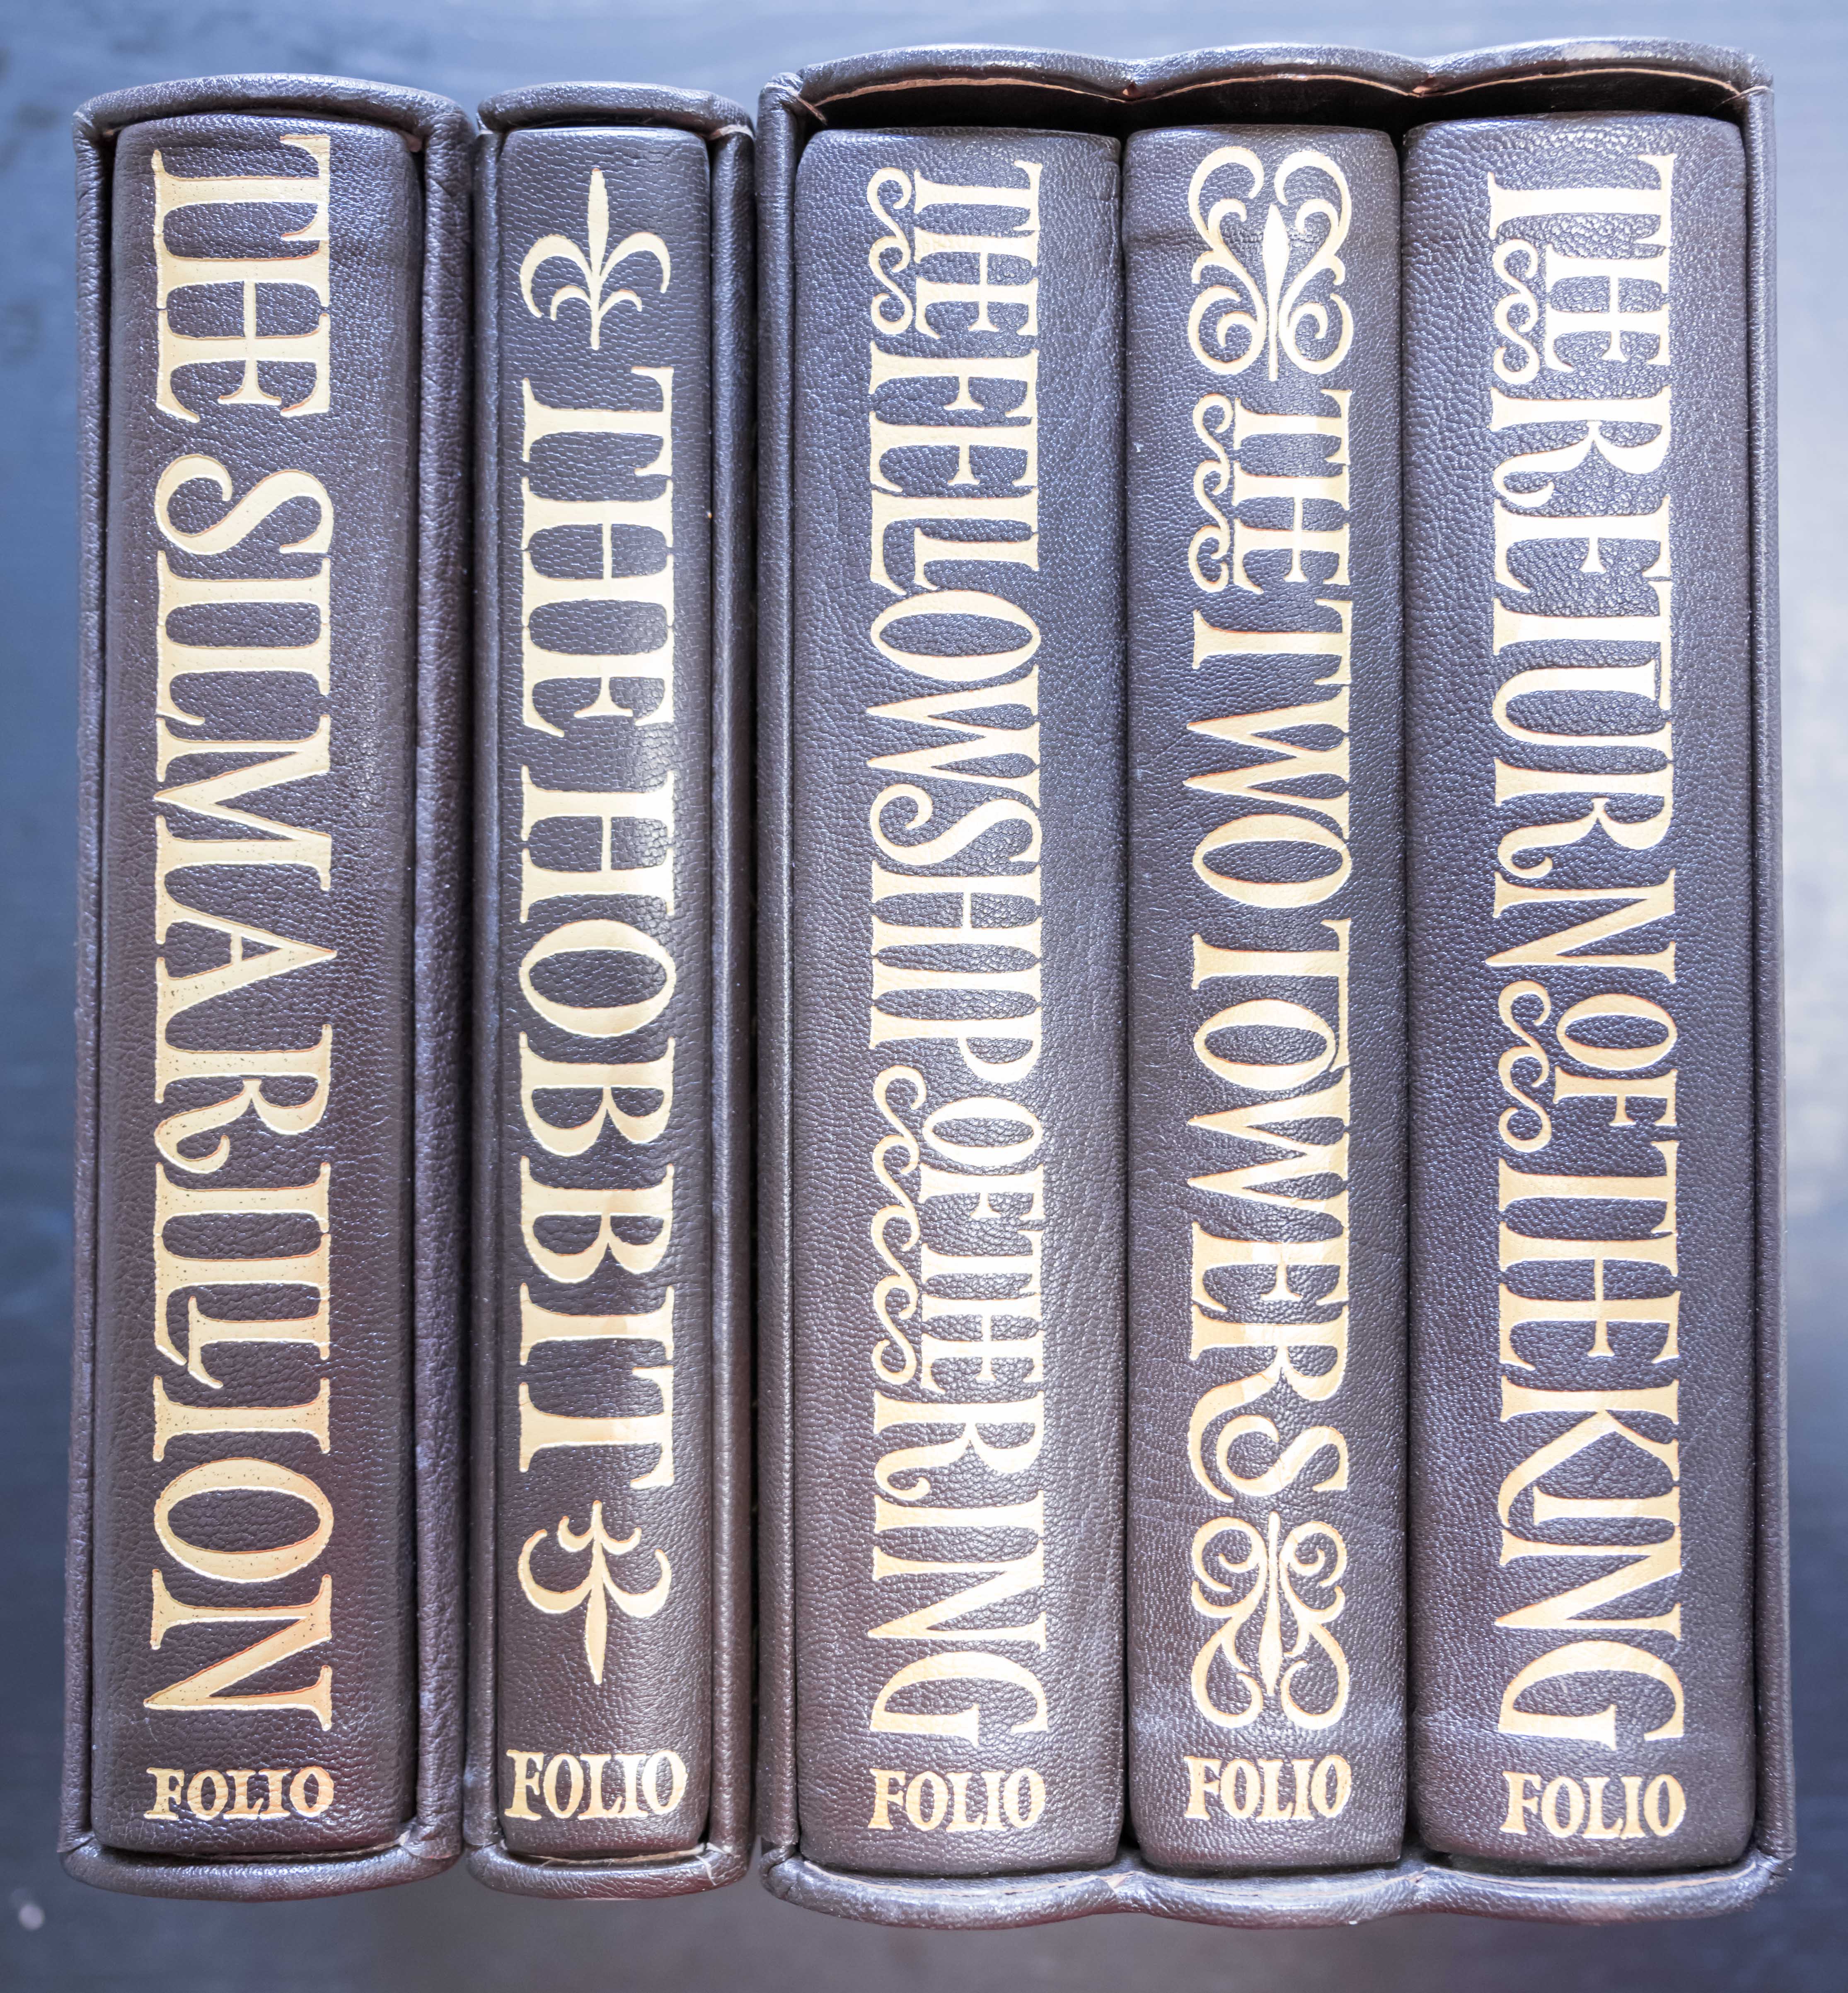 Folio Society Limited Numbered Editions, The Hobbit, The Lord of the Rings and The Silmarillion. All with Limitation Number #989 of 1750